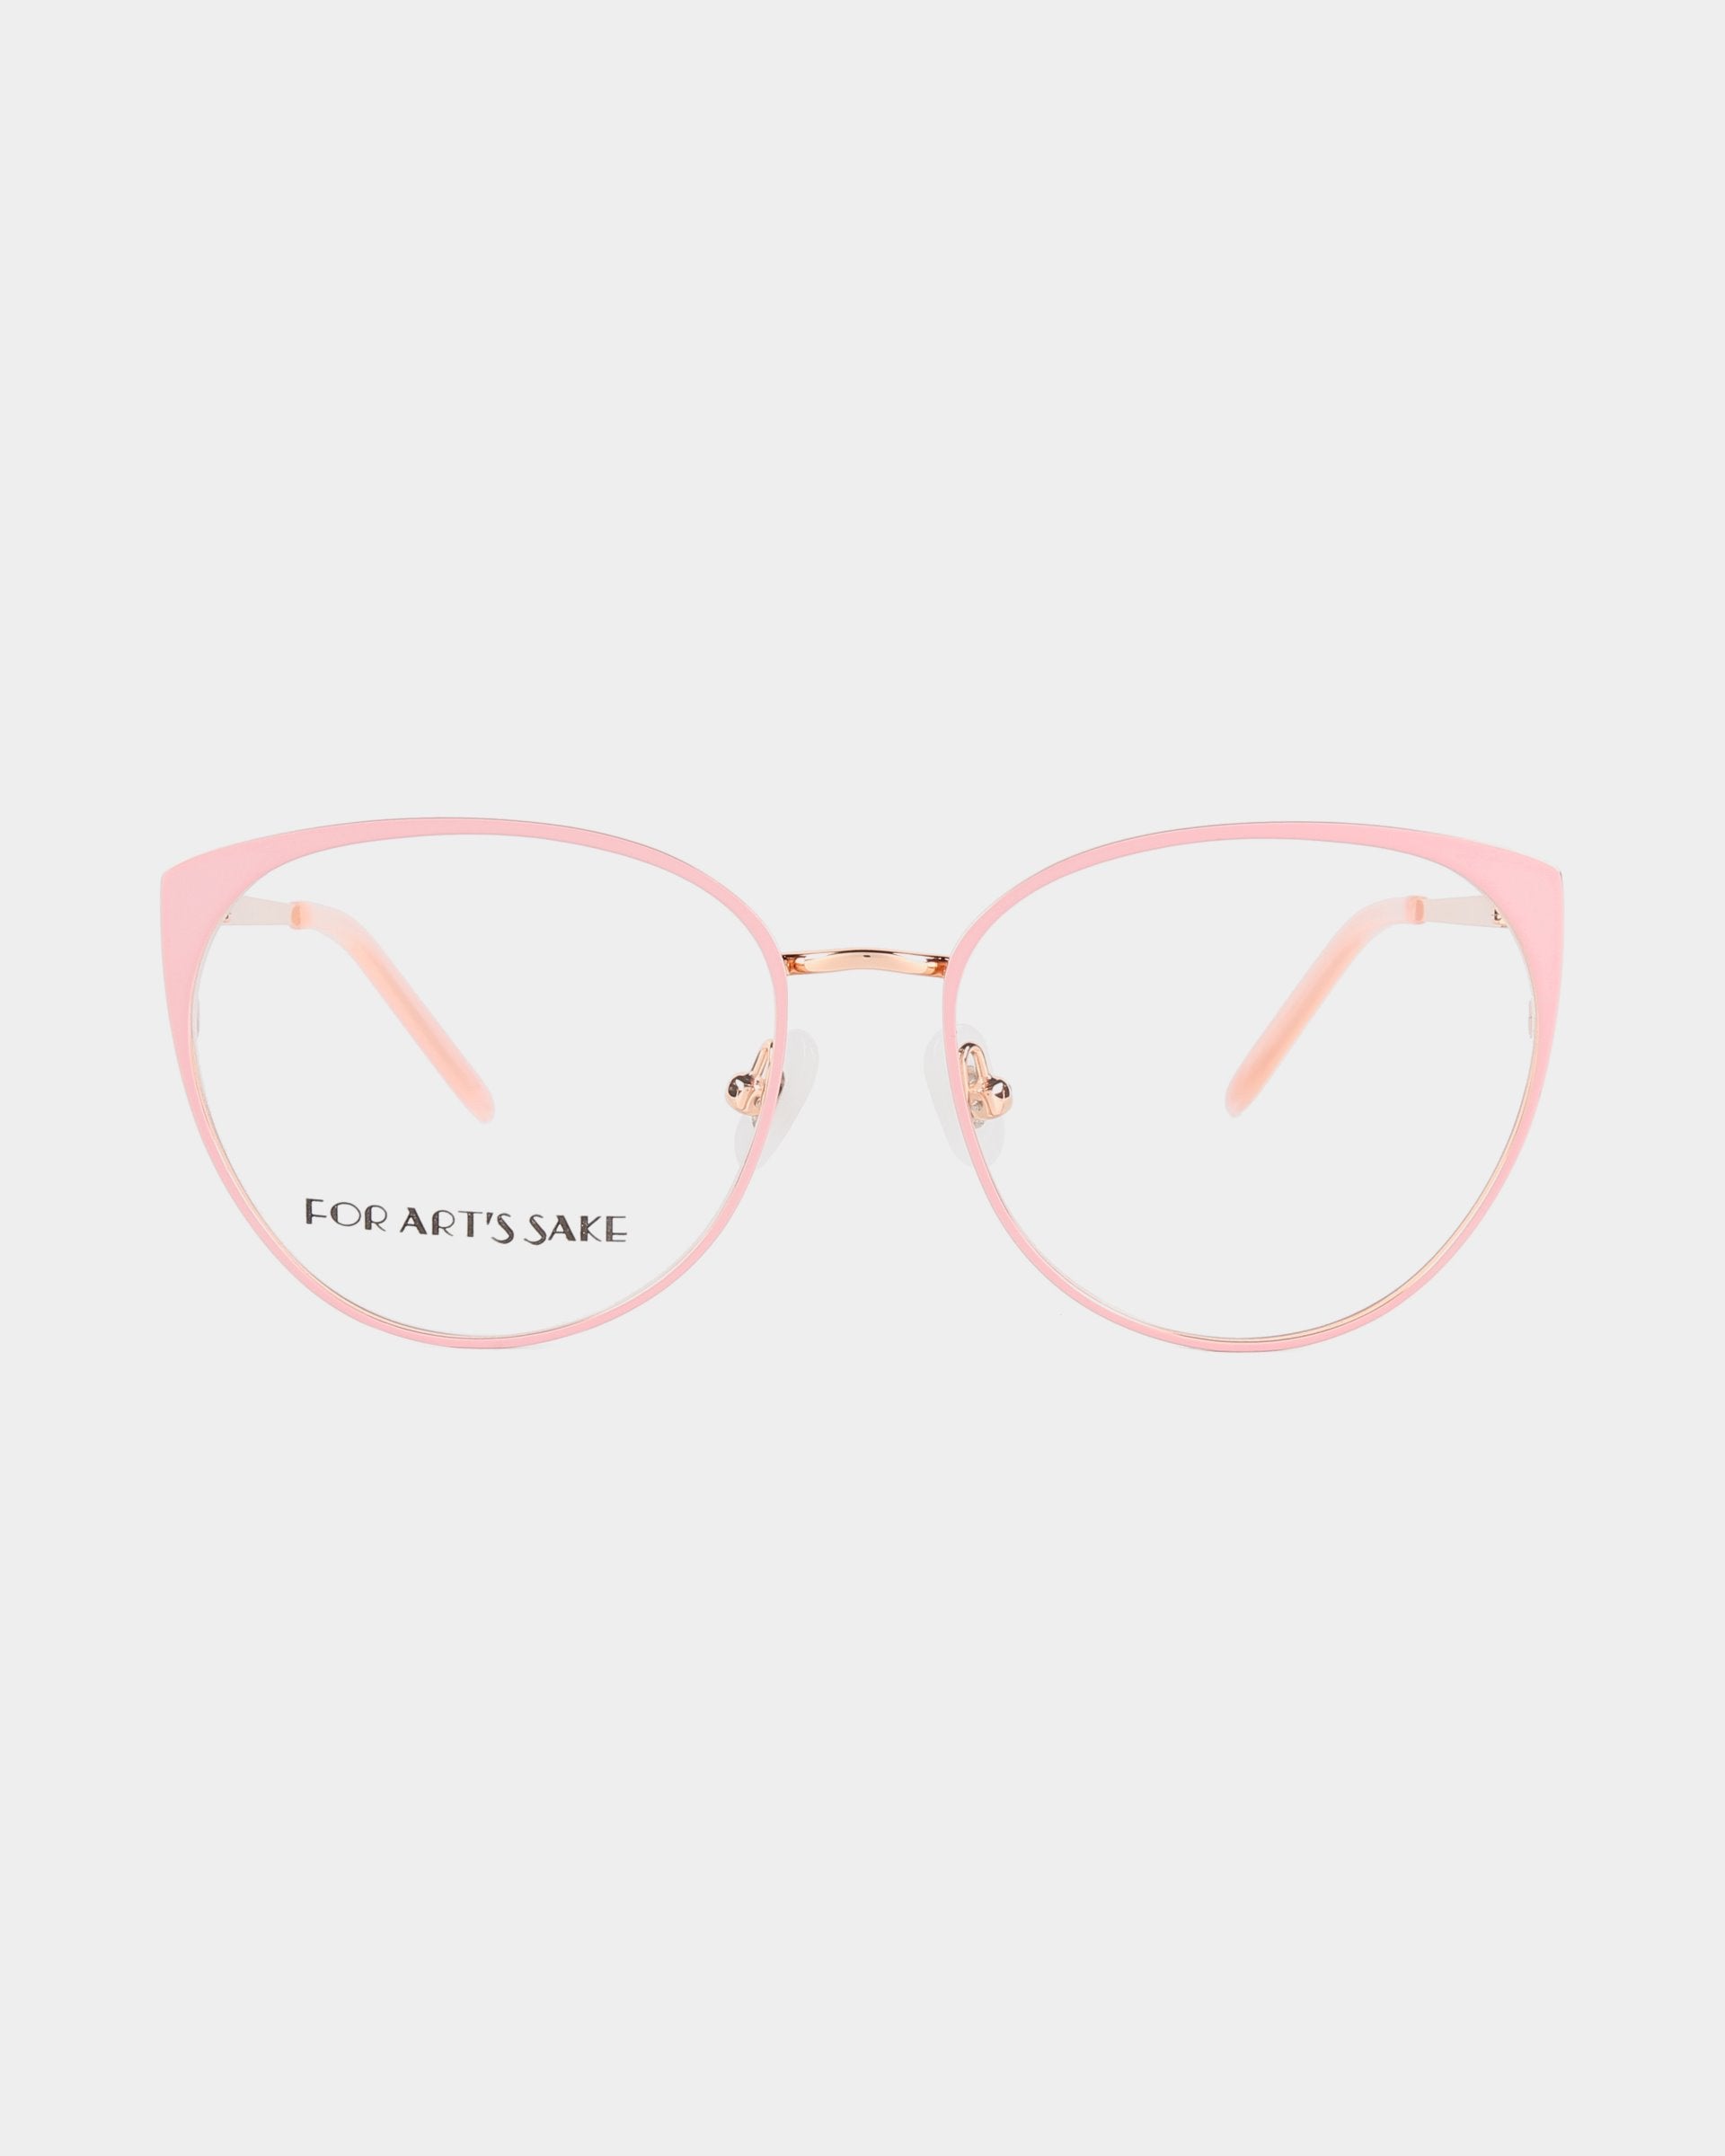 A pair of pink cat-eye glasses with clear lenses and a thin gold nose bridge featuring 18-karat gold plating. The inner arms are light pink, and the left lens has &quot;For Art&#39;s Sake®&quot; written in black text. The Kaia glasses, which also offer a blue light filter, are set against a plain white background.